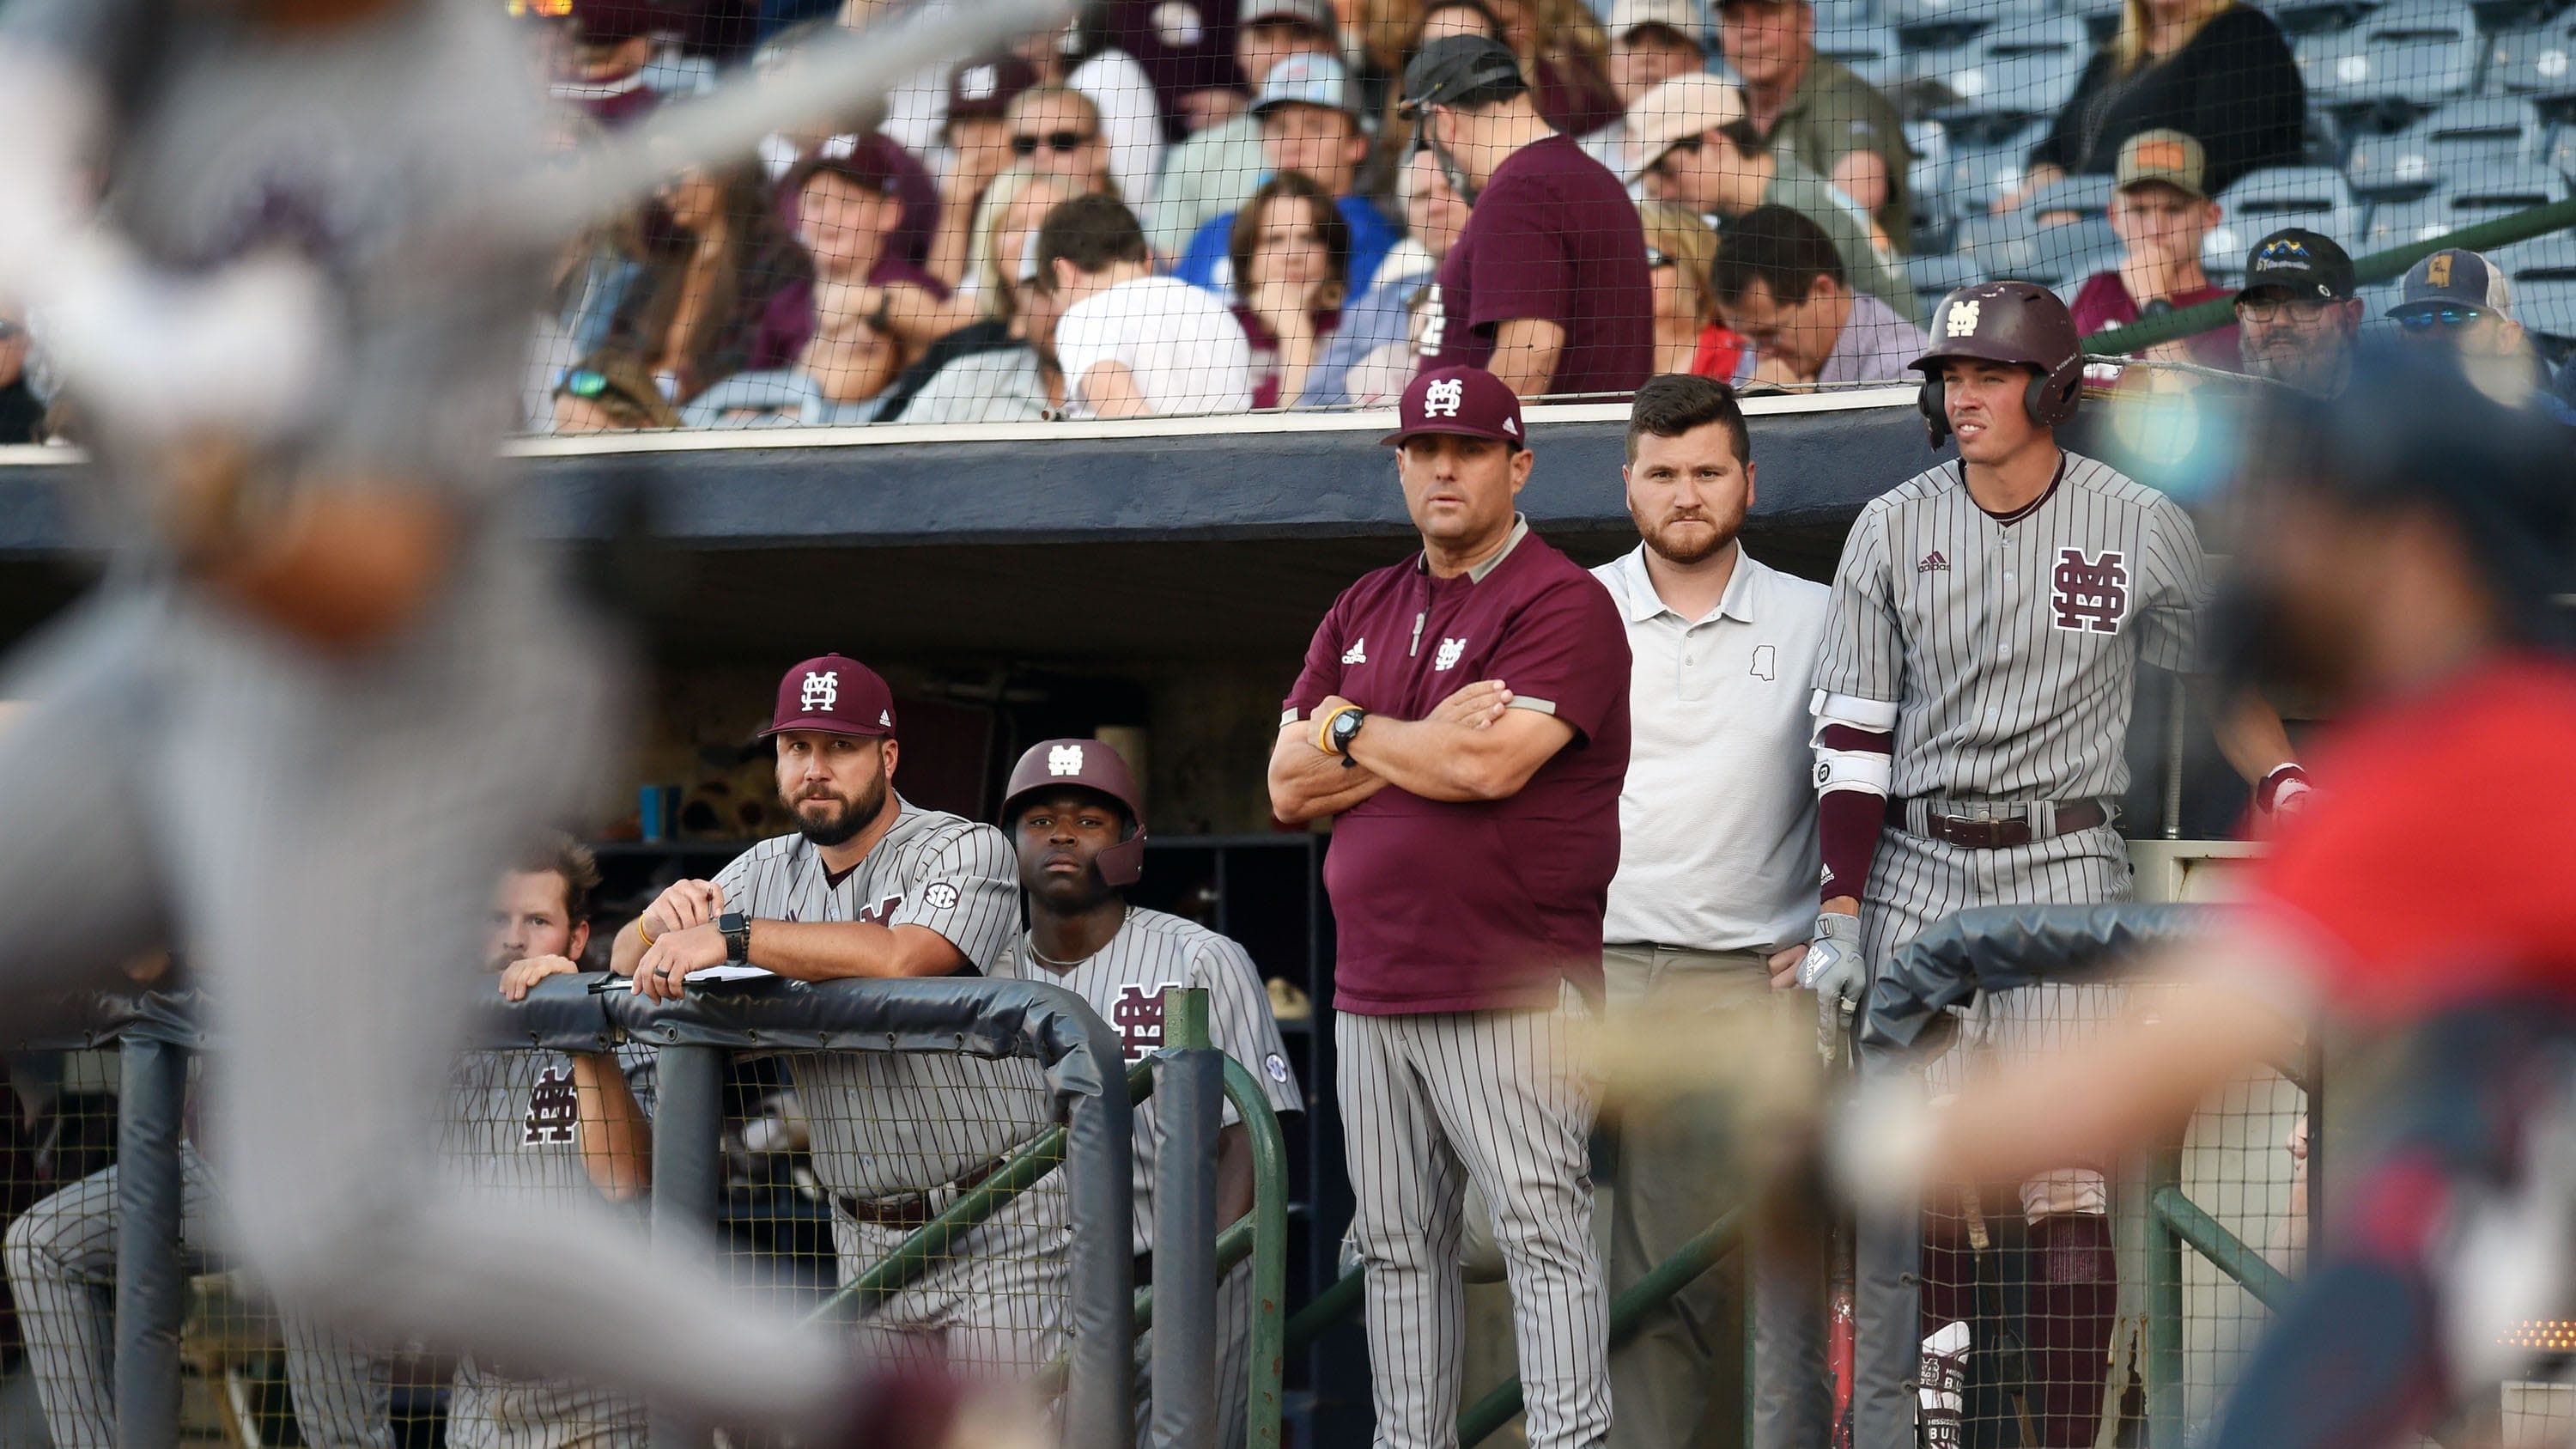 Mississippi State Bulldogs Blanked 4-0 by Vanderbilt in Crucial Series Faceoff